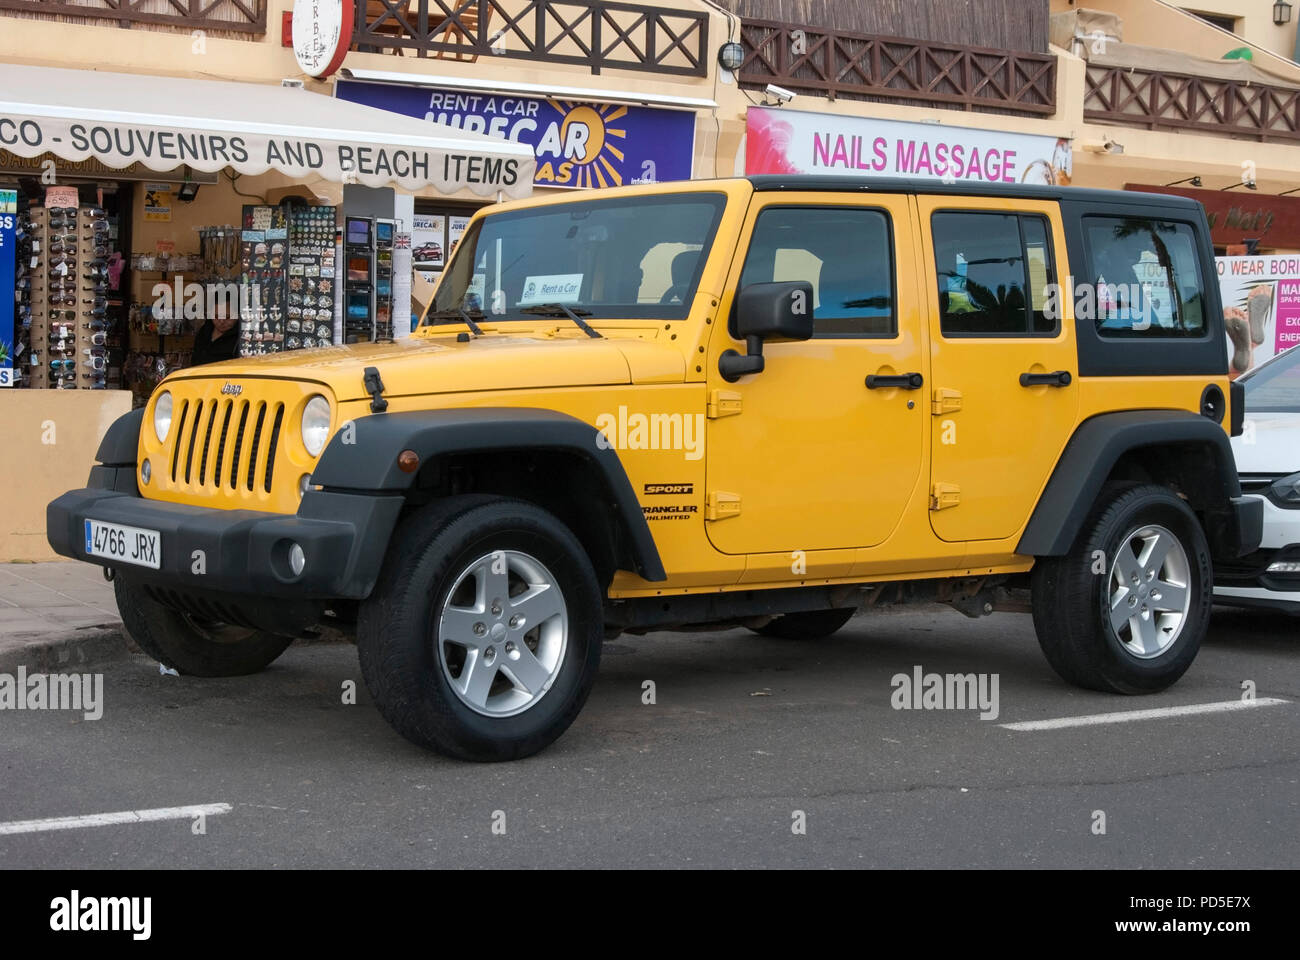 2017 Yellow & Black Jeep Wrangler Sport Unlimited Car front nearside driver  side view of yellow and black 2017 model four door 4 x 4 SUV jeep wrangler  Stock Photo - Alamy